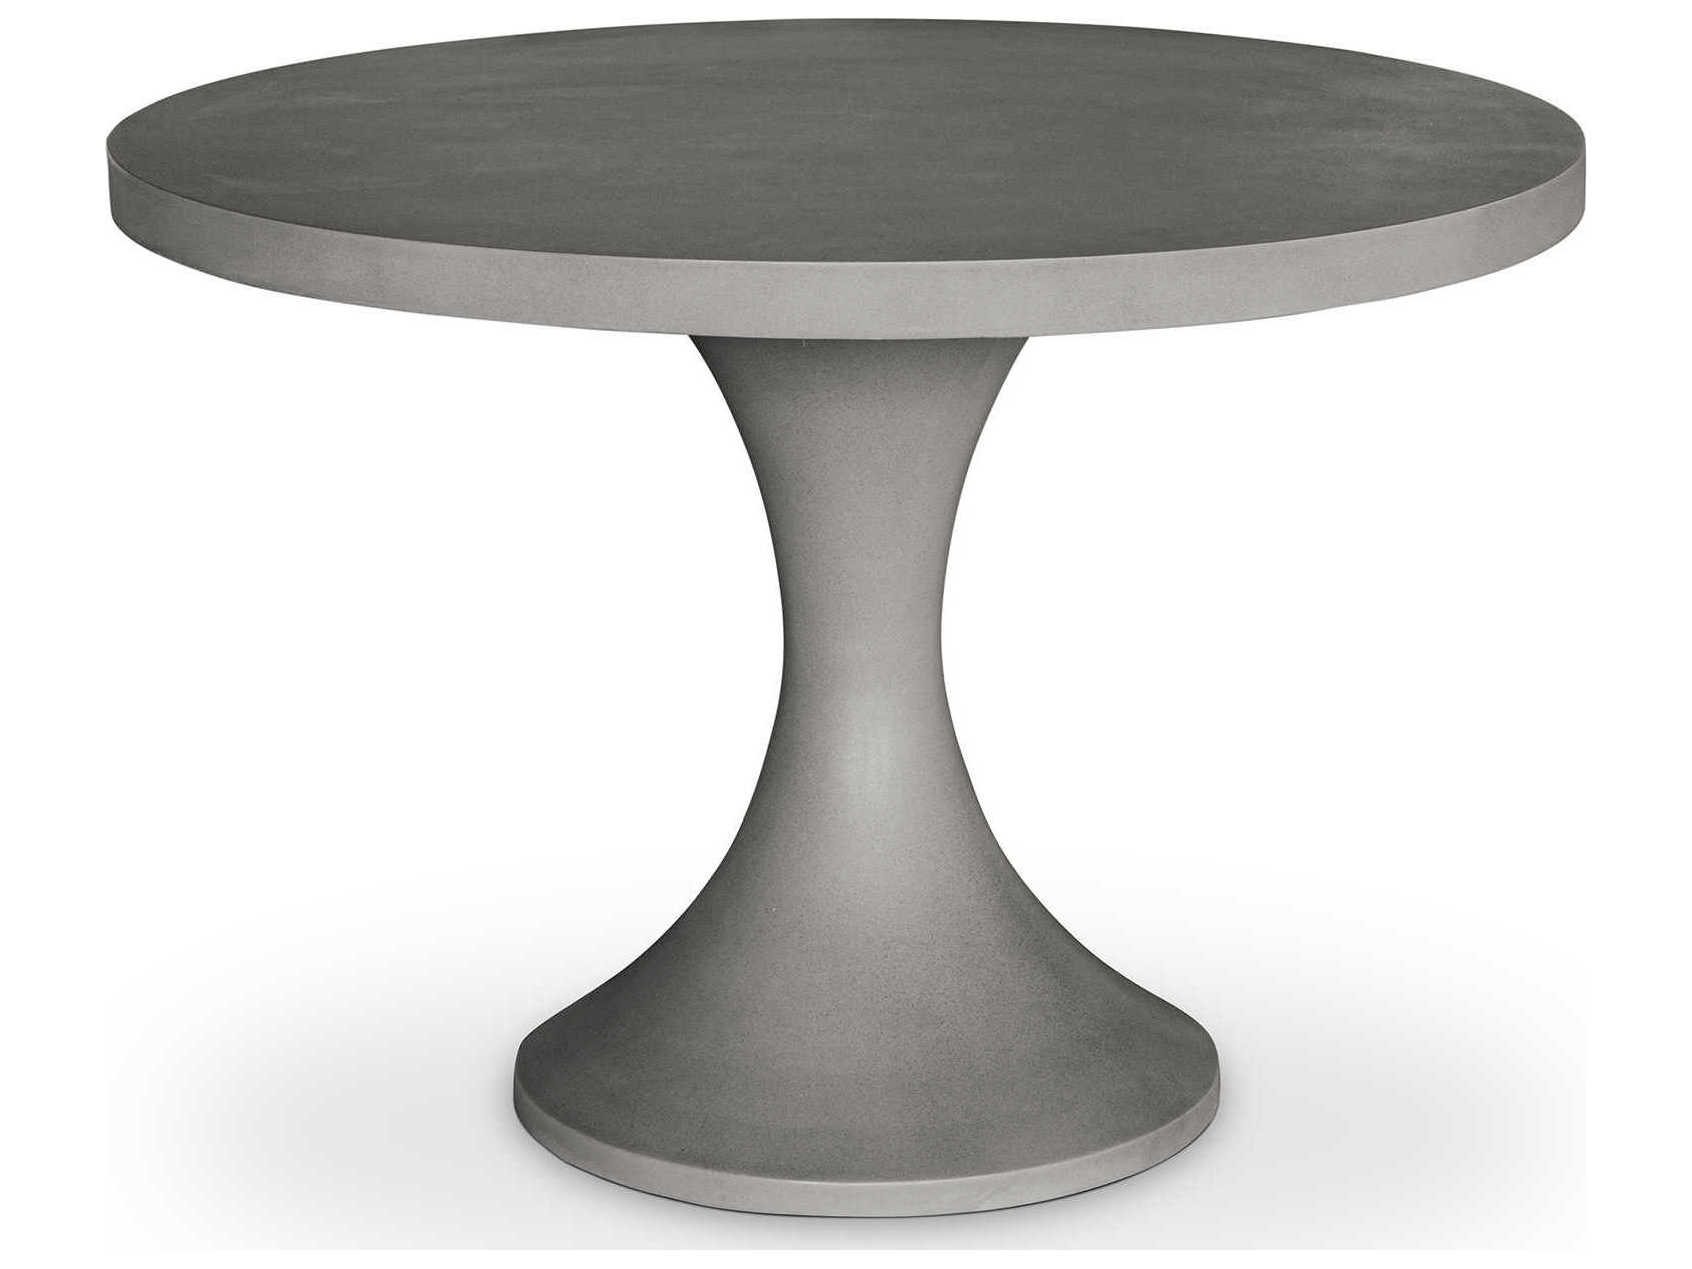 Wide Concrete Round Dining Table, Round Concrete Dining Table Outdoor